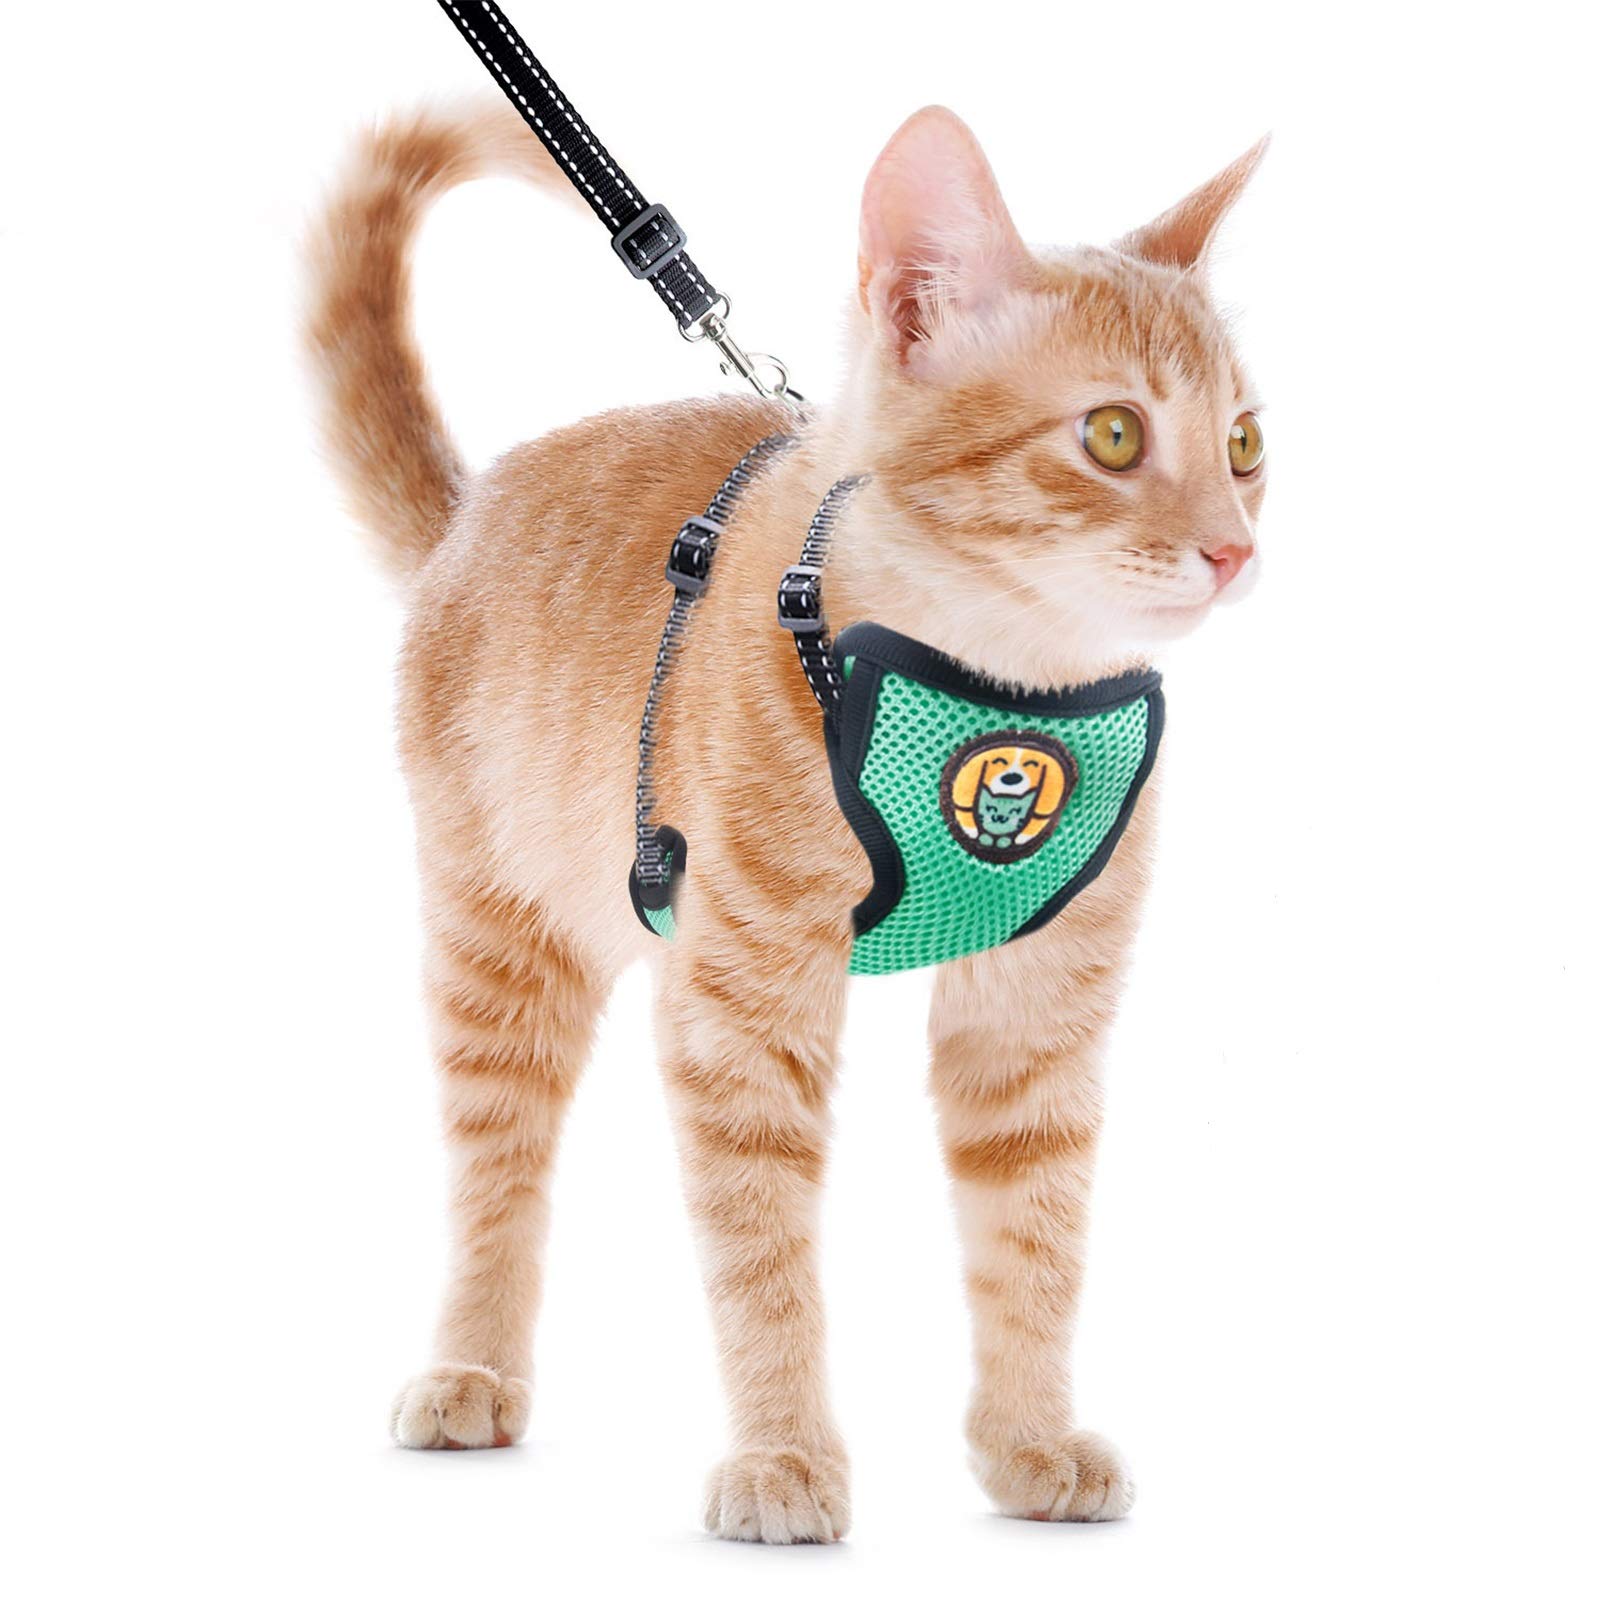 Adjustable Cat Kitten Harness and Leash Escape Proof